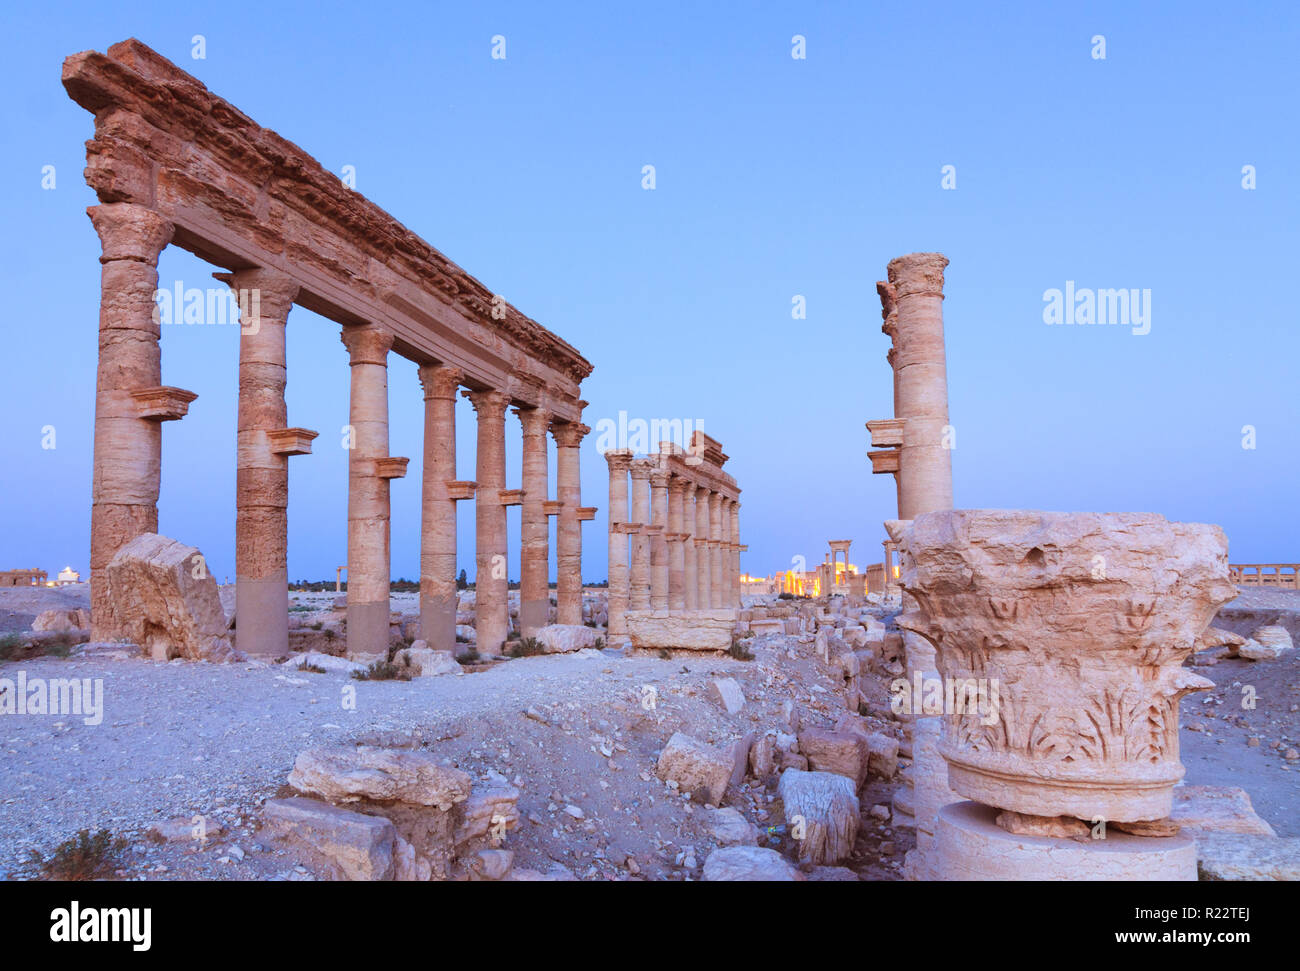 Palmyra, Homs Governorate, Syria - May 26th, 2009 :  Great Colonnade of Palmyra at dusk. Built  during the second and third century CE, it stretched f Stock Photo